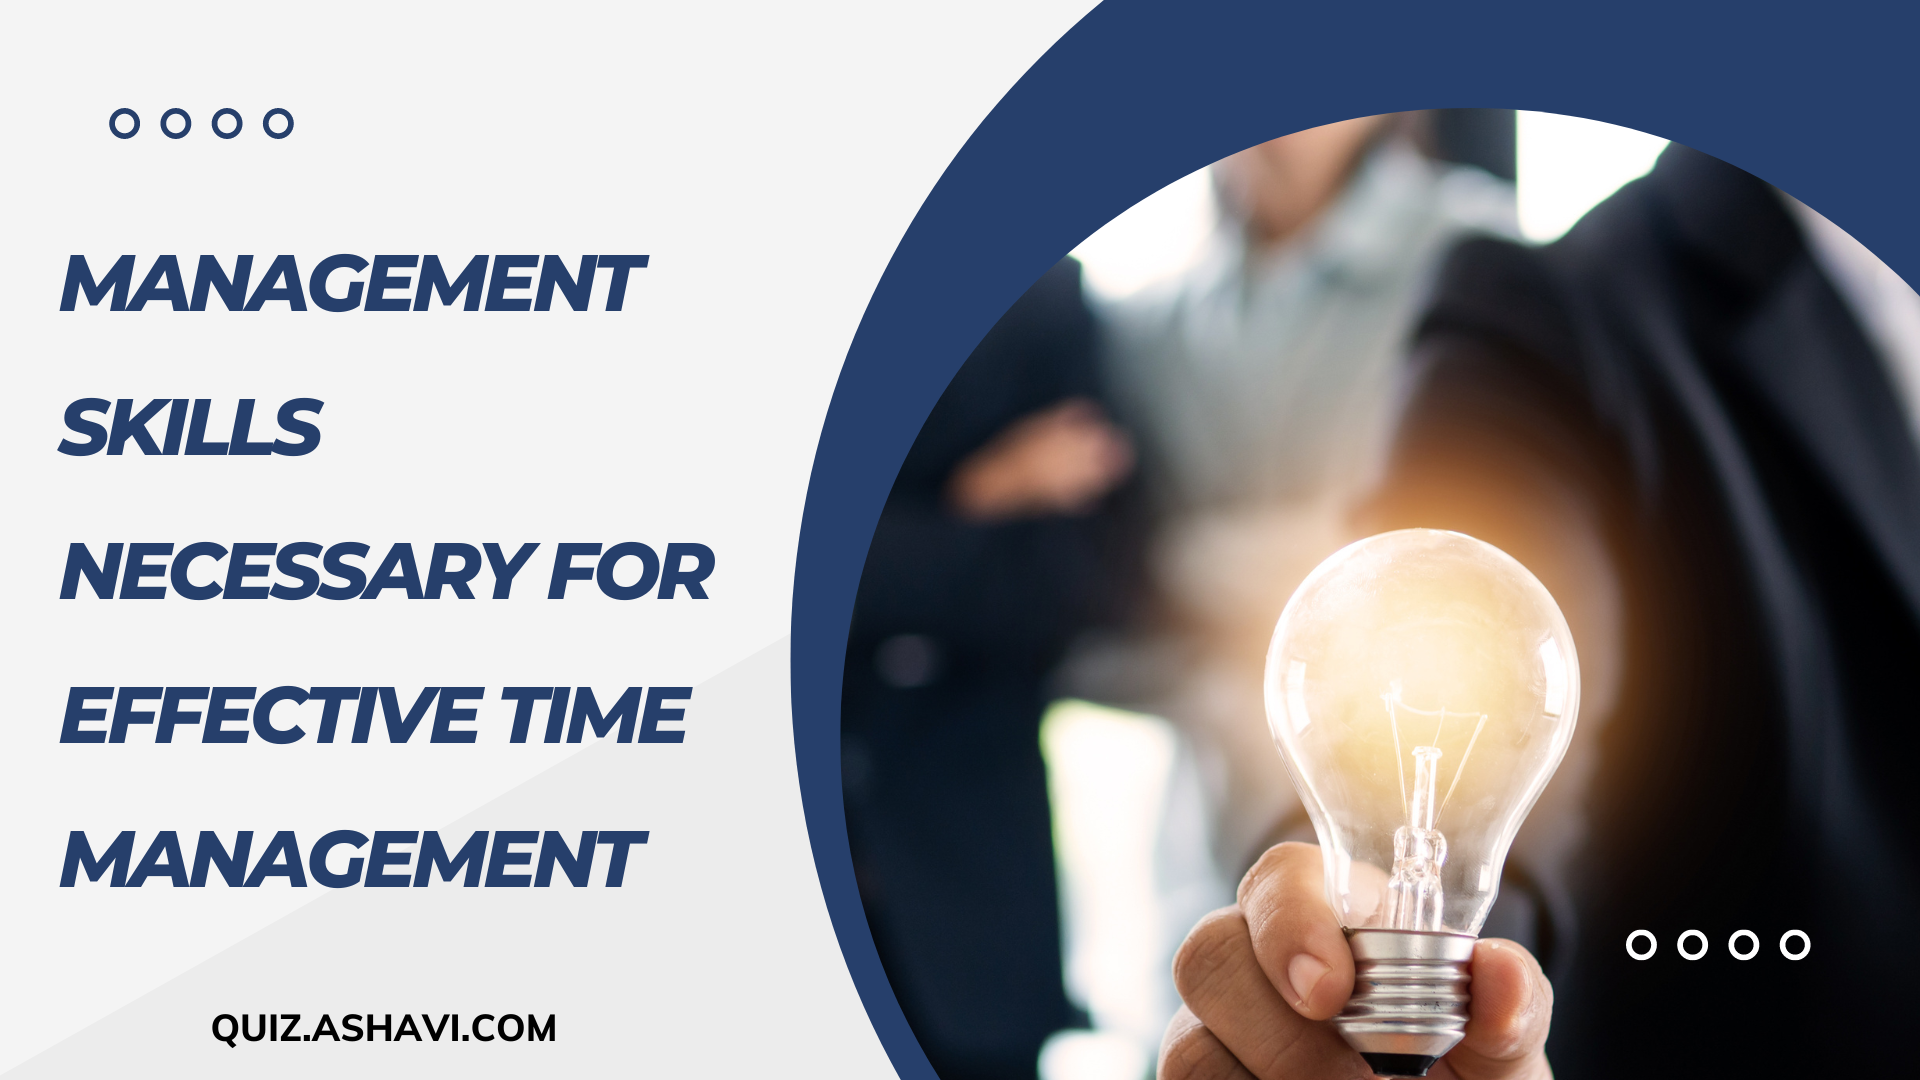 Management Skills Necessary for Effective Time Management